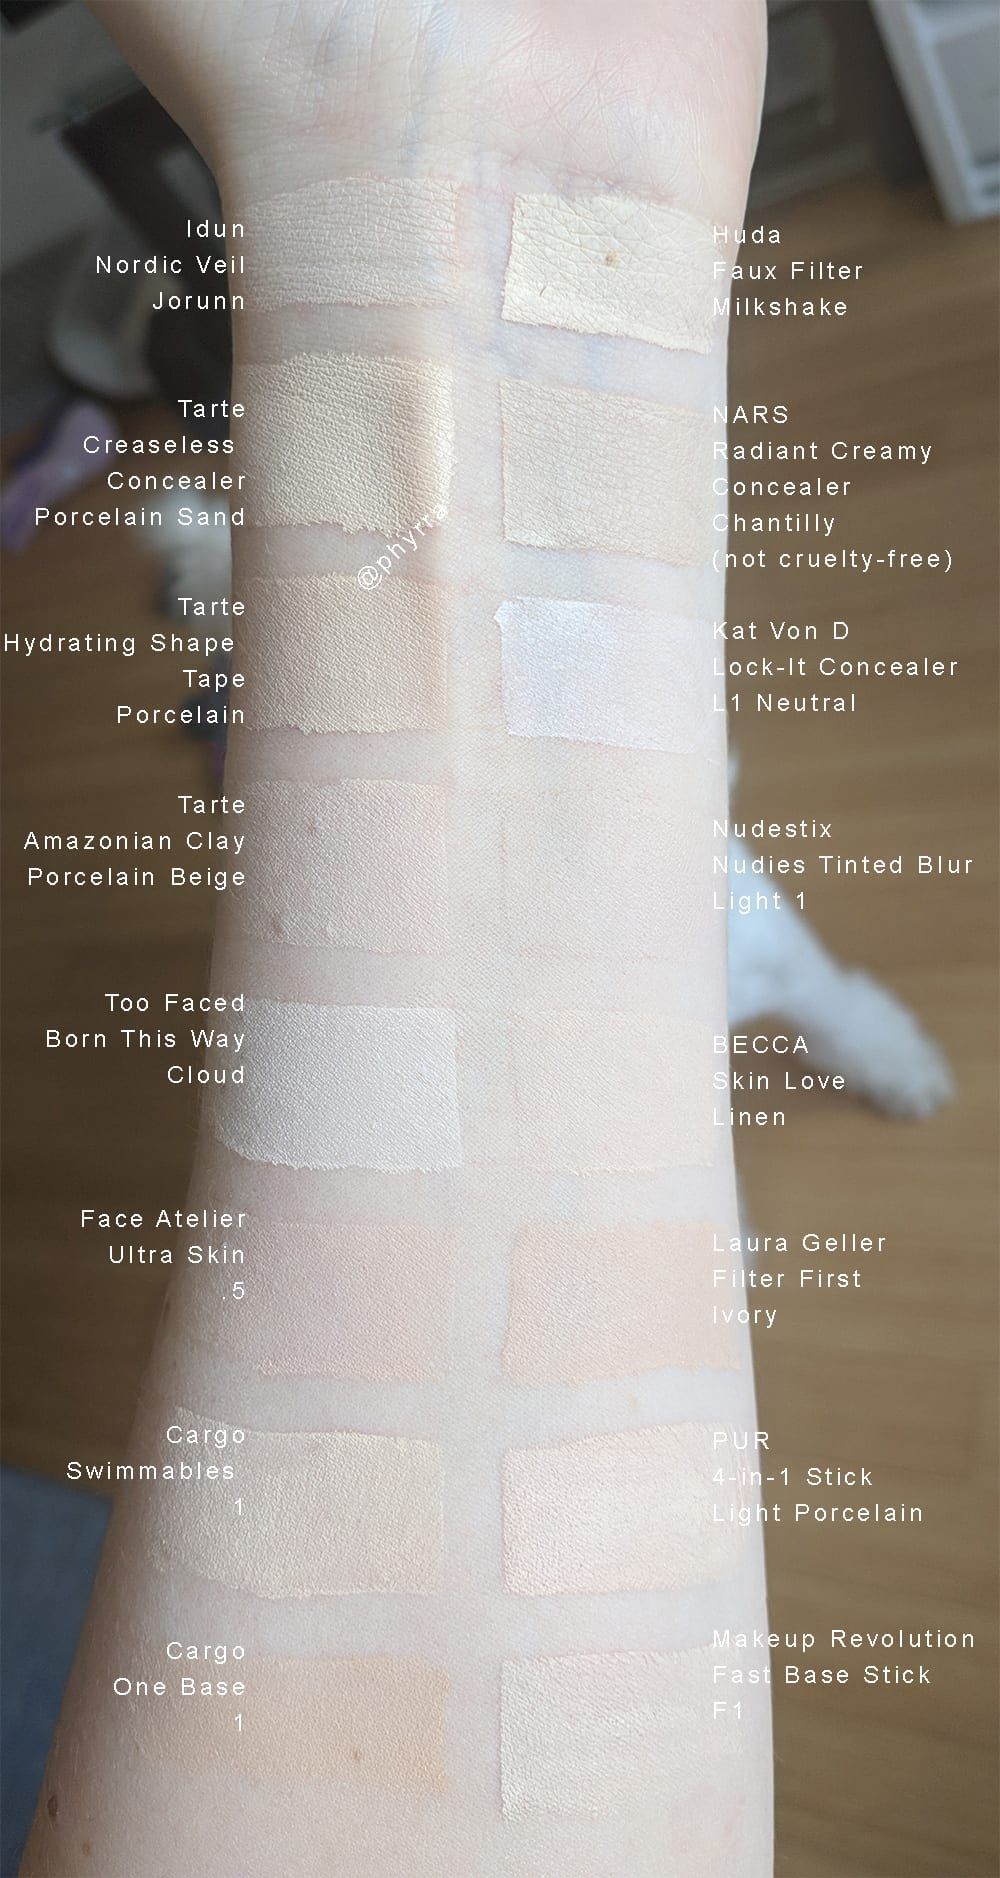 Pale Foundation Swatches - Swatches of new foundations for fair skin - Pale Foundation Swatches - Swatches of new foundations for fair skin -   14 beauty Makeup pale skin ideas